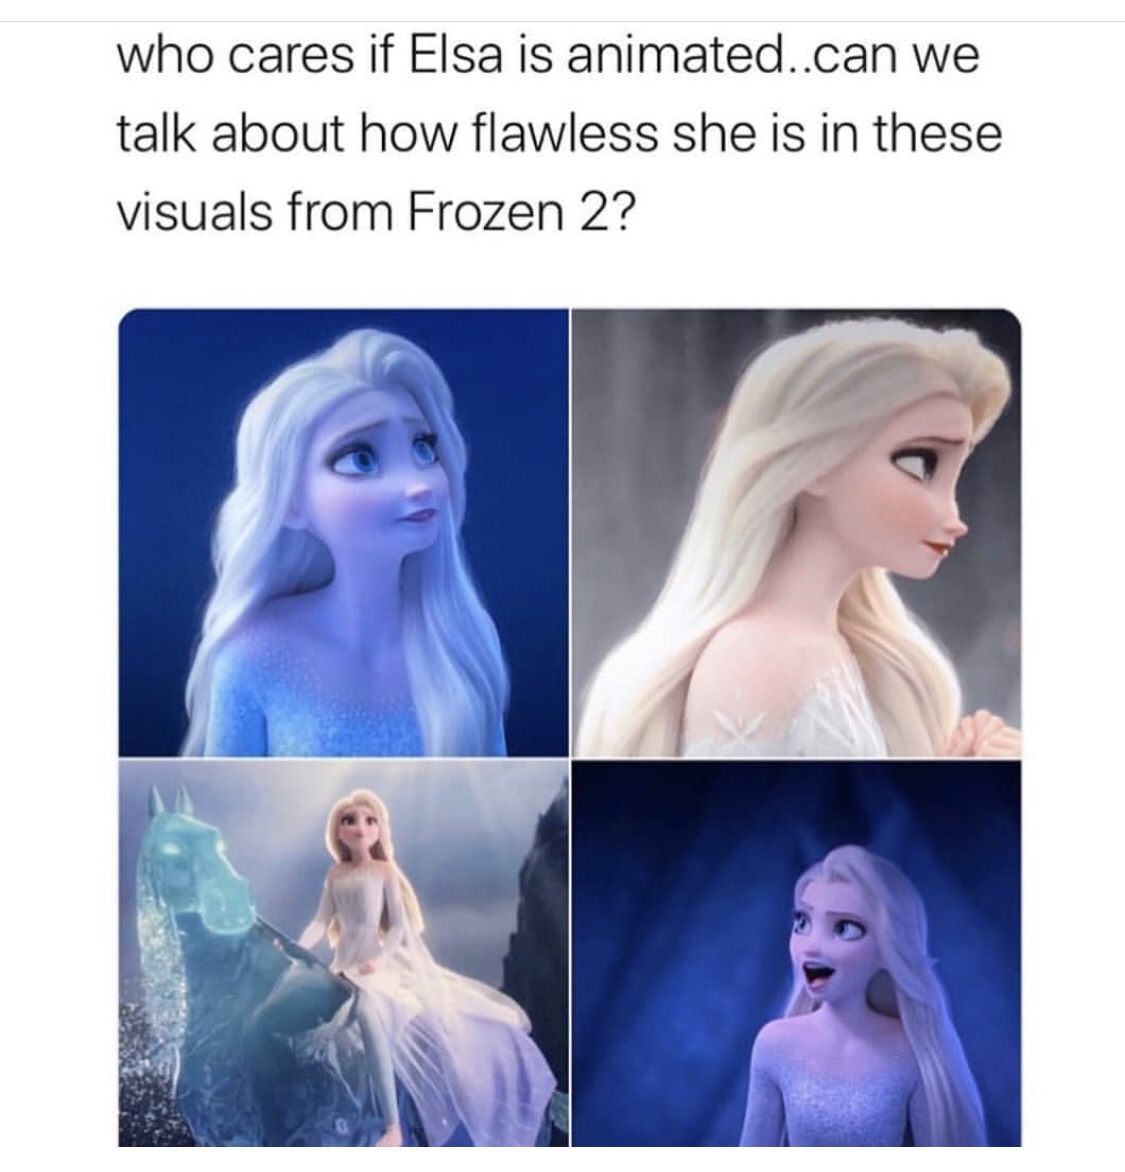 lavender - who cares if Elsa is animated..can we talk about how flawless she is in these visuals from Frozen 2?